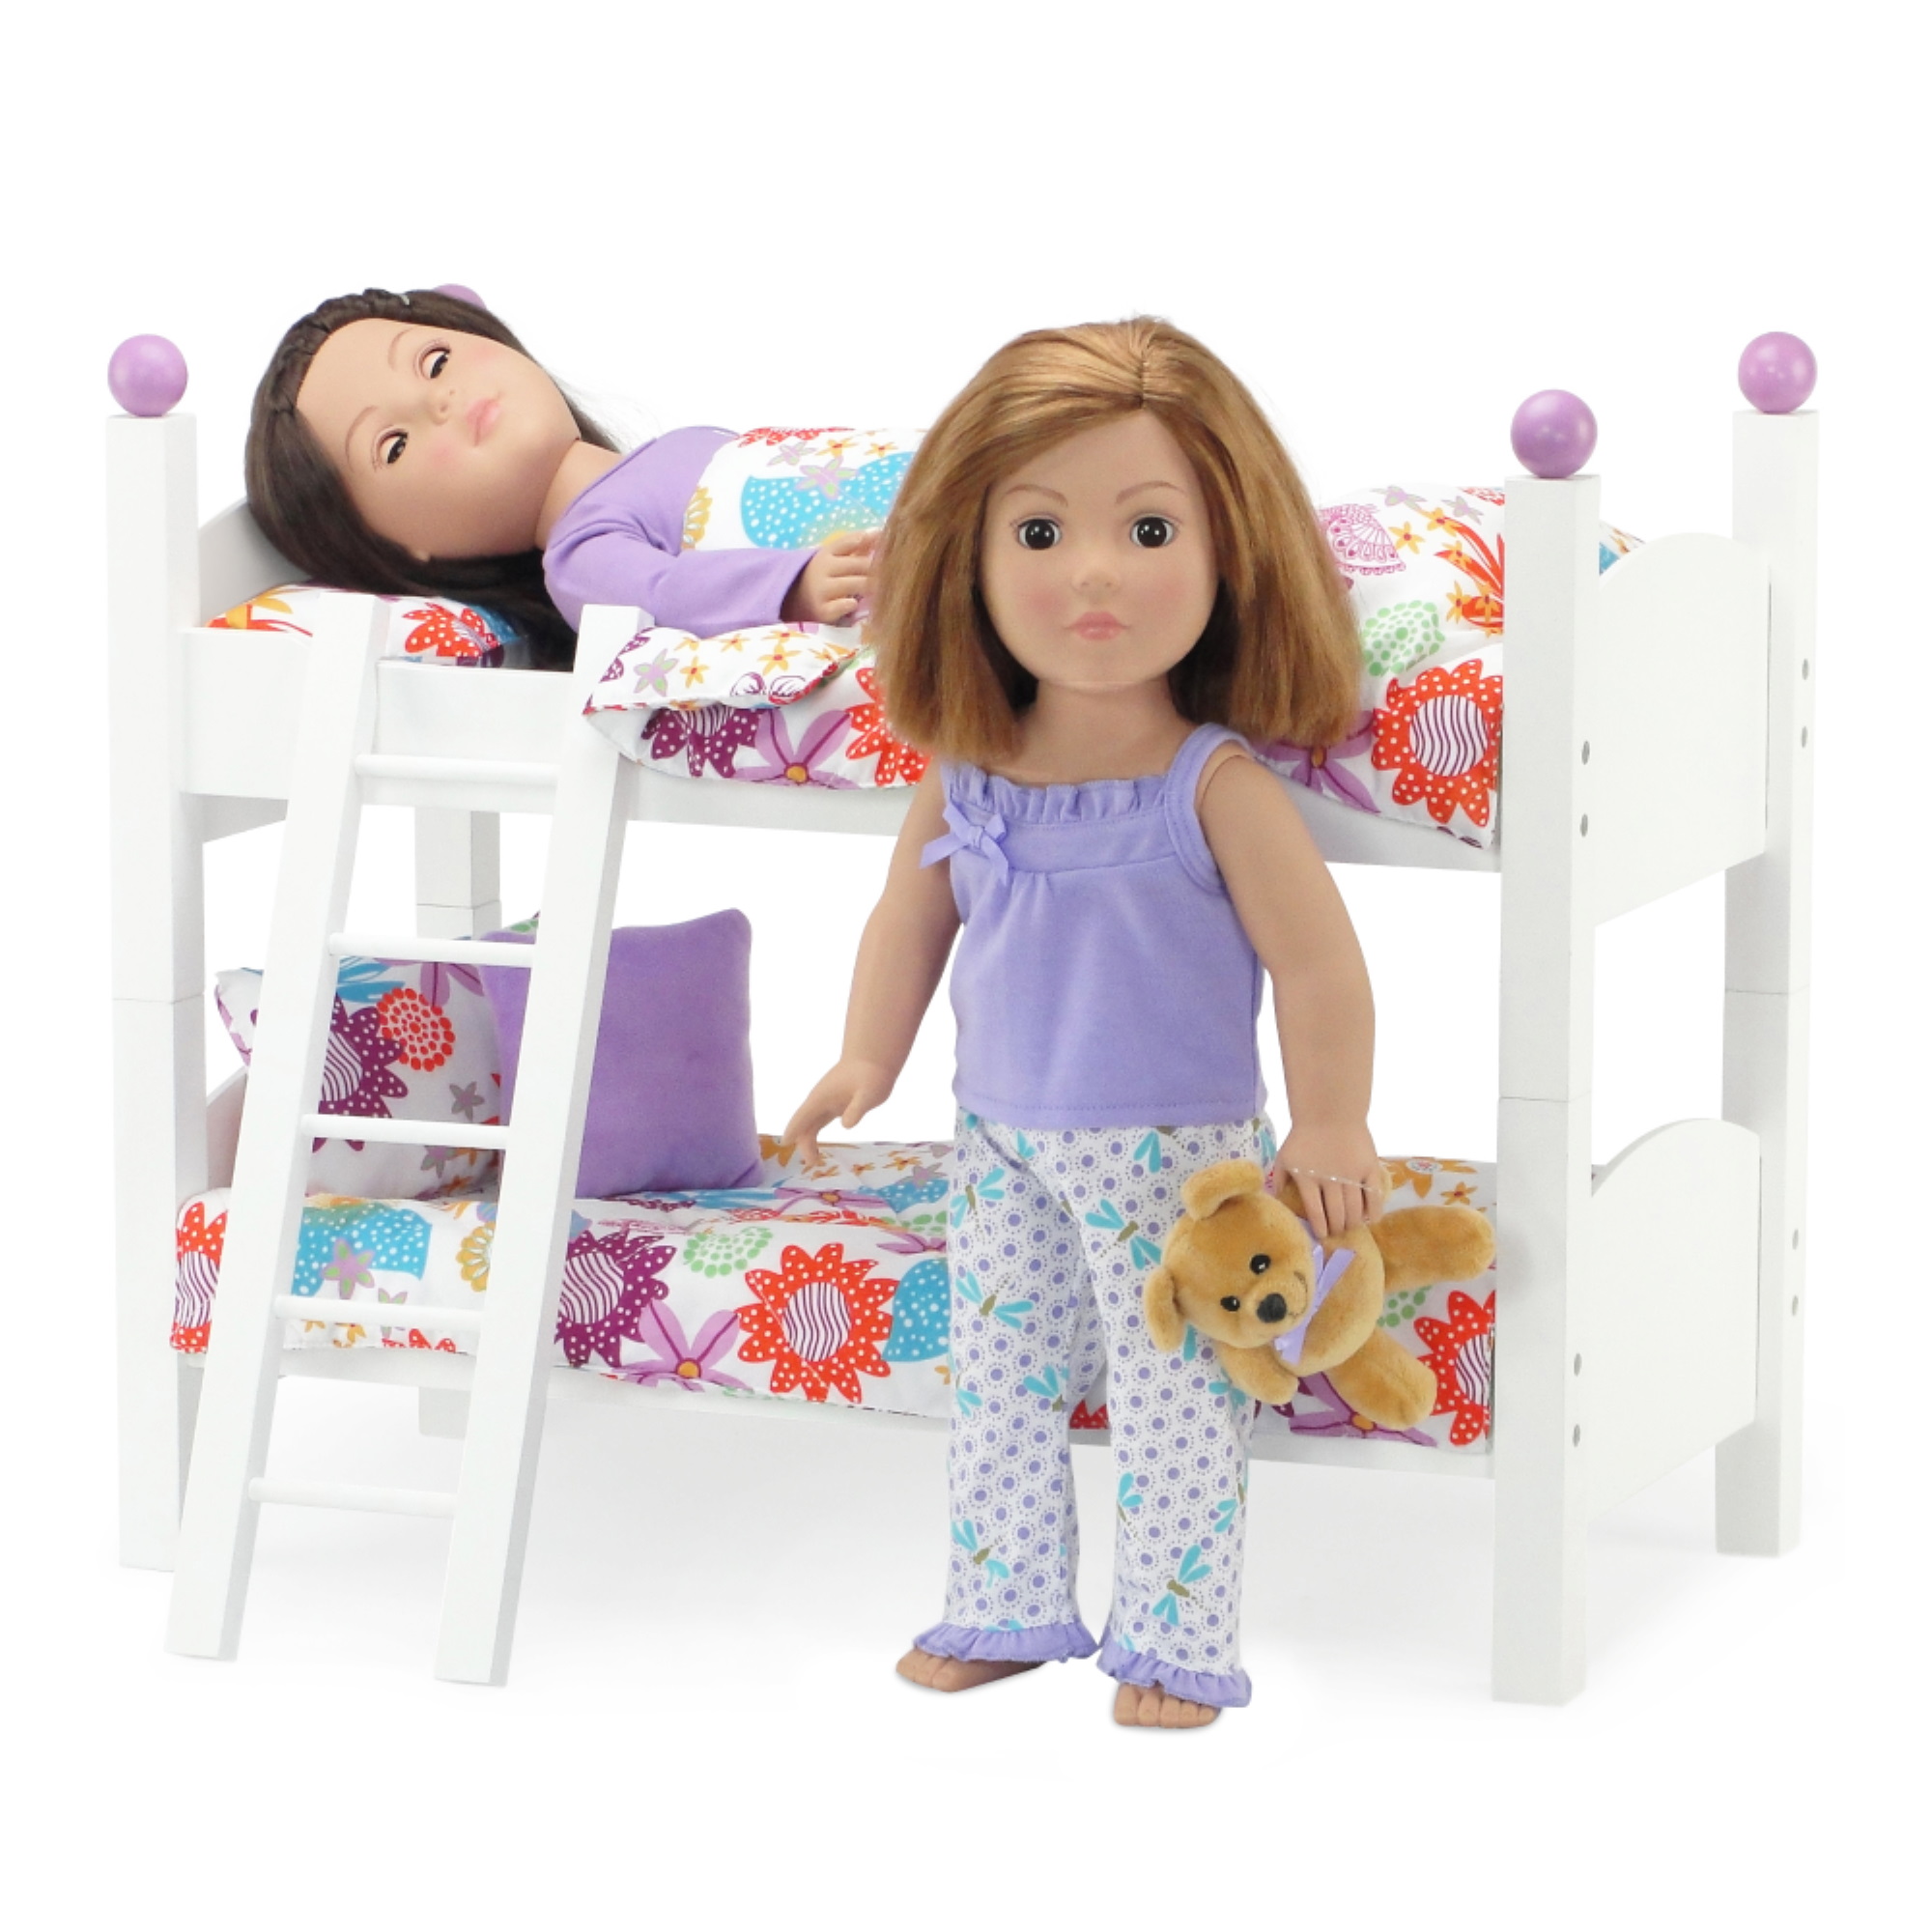 Emily Rose 18 Inch Doll Furniture | 18" Doll Bunk Bed - 2 Single Stackable Doll Beds | Doll Bunkbed Includes 2 Sets of Colorful Bedding & Ladder | Fits 18" American Girl Dolls - image 5 of 8